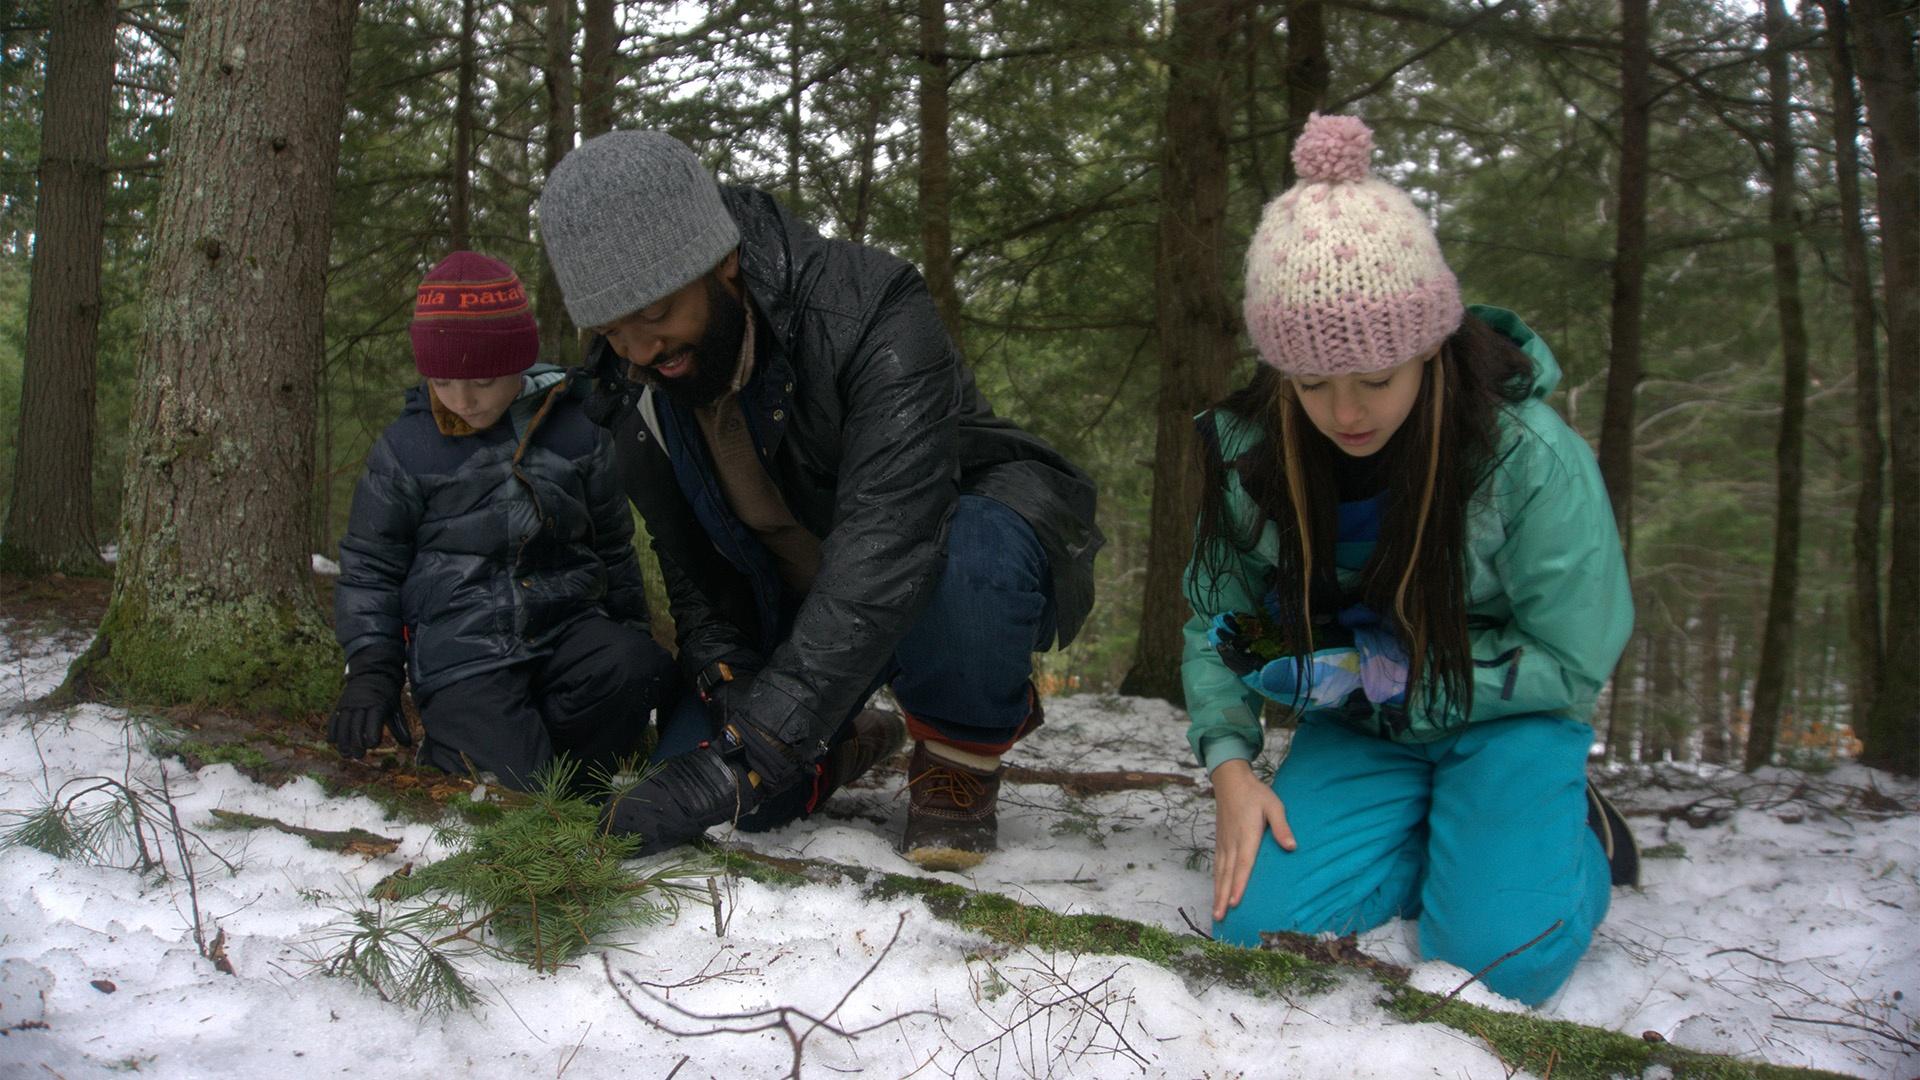 Baratunde crouched gathering moss with 2 kids